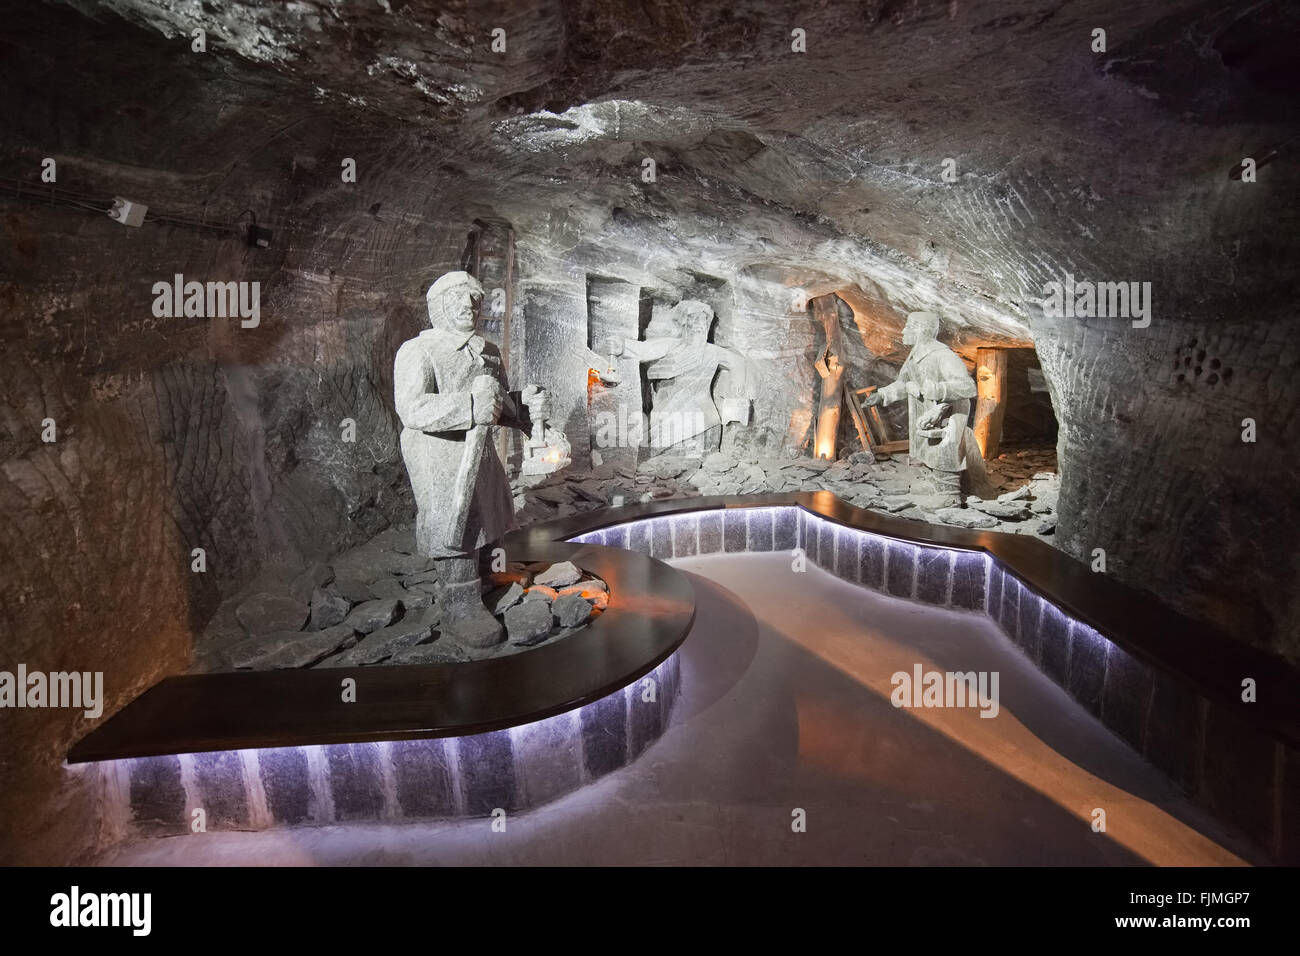 Europe, Poland, Wieliczka Salt Mine, salt rock sculptures of miners and curved bench Stock Photo